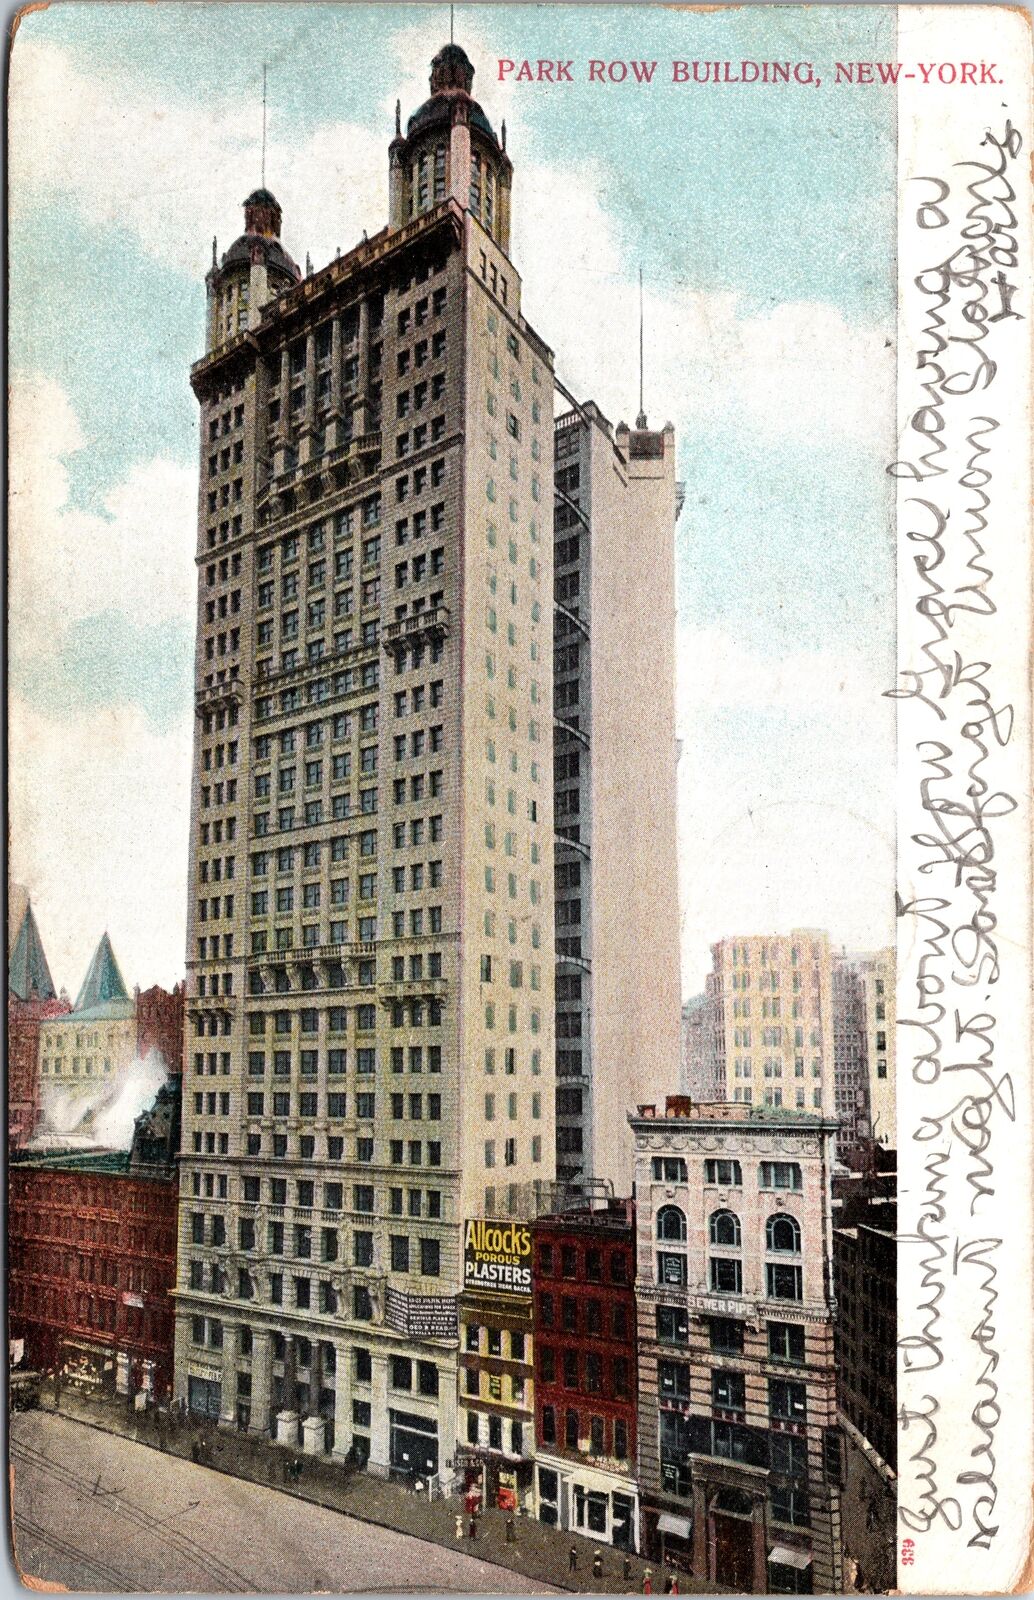 VINTAGE POSTCARD STREET SCENE AT THE PARK ROW BUILDING IN NEW YORK CITY 1906